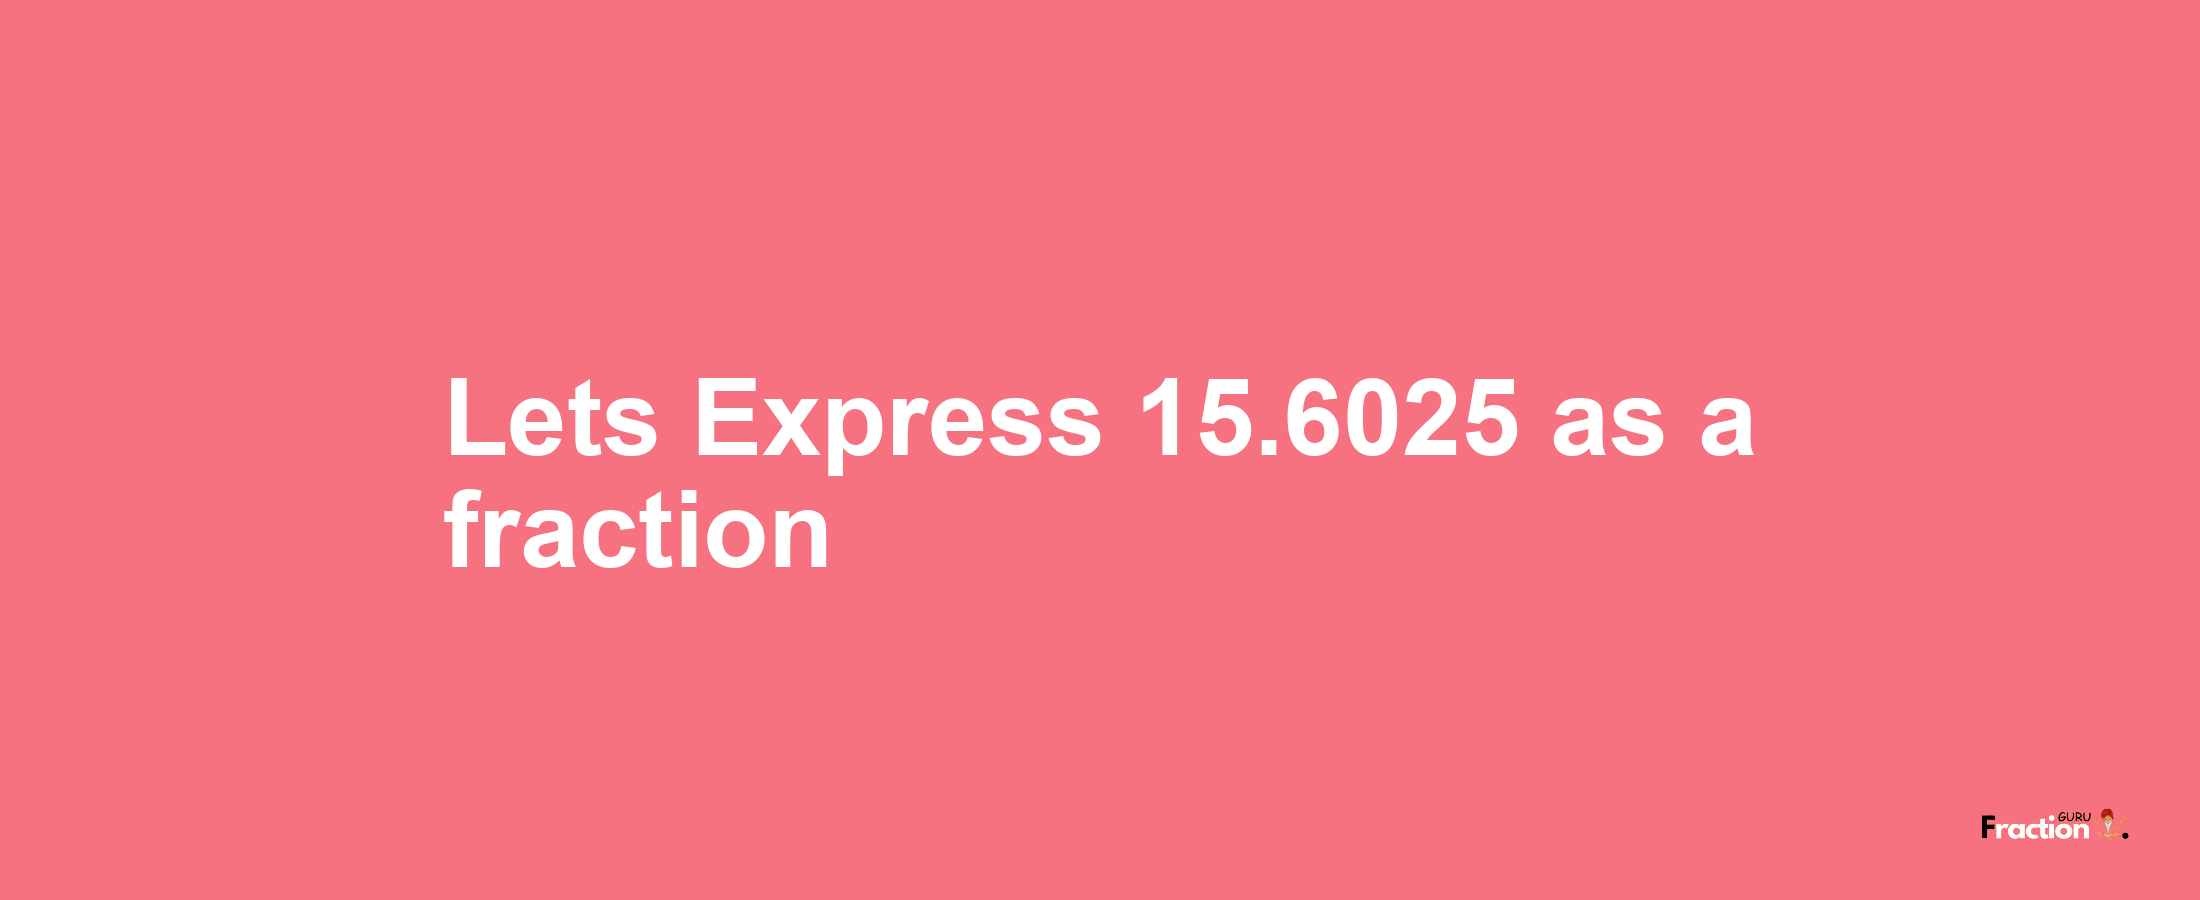 Lets Express 15.6025 as afraction